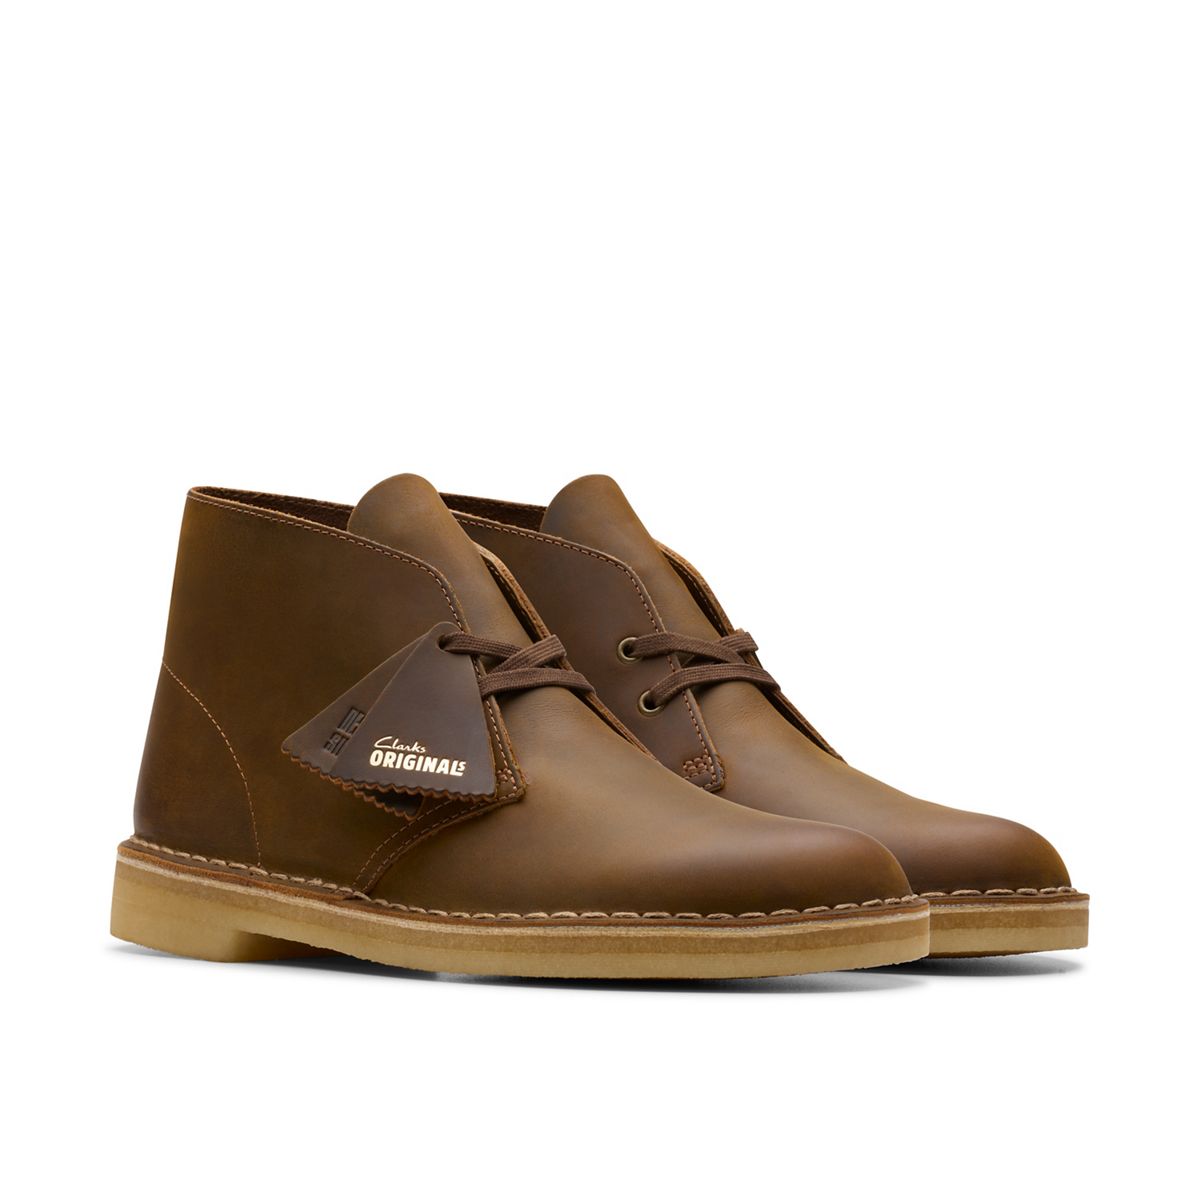 Beeswax - Clarks Canada Official Site | Clarks